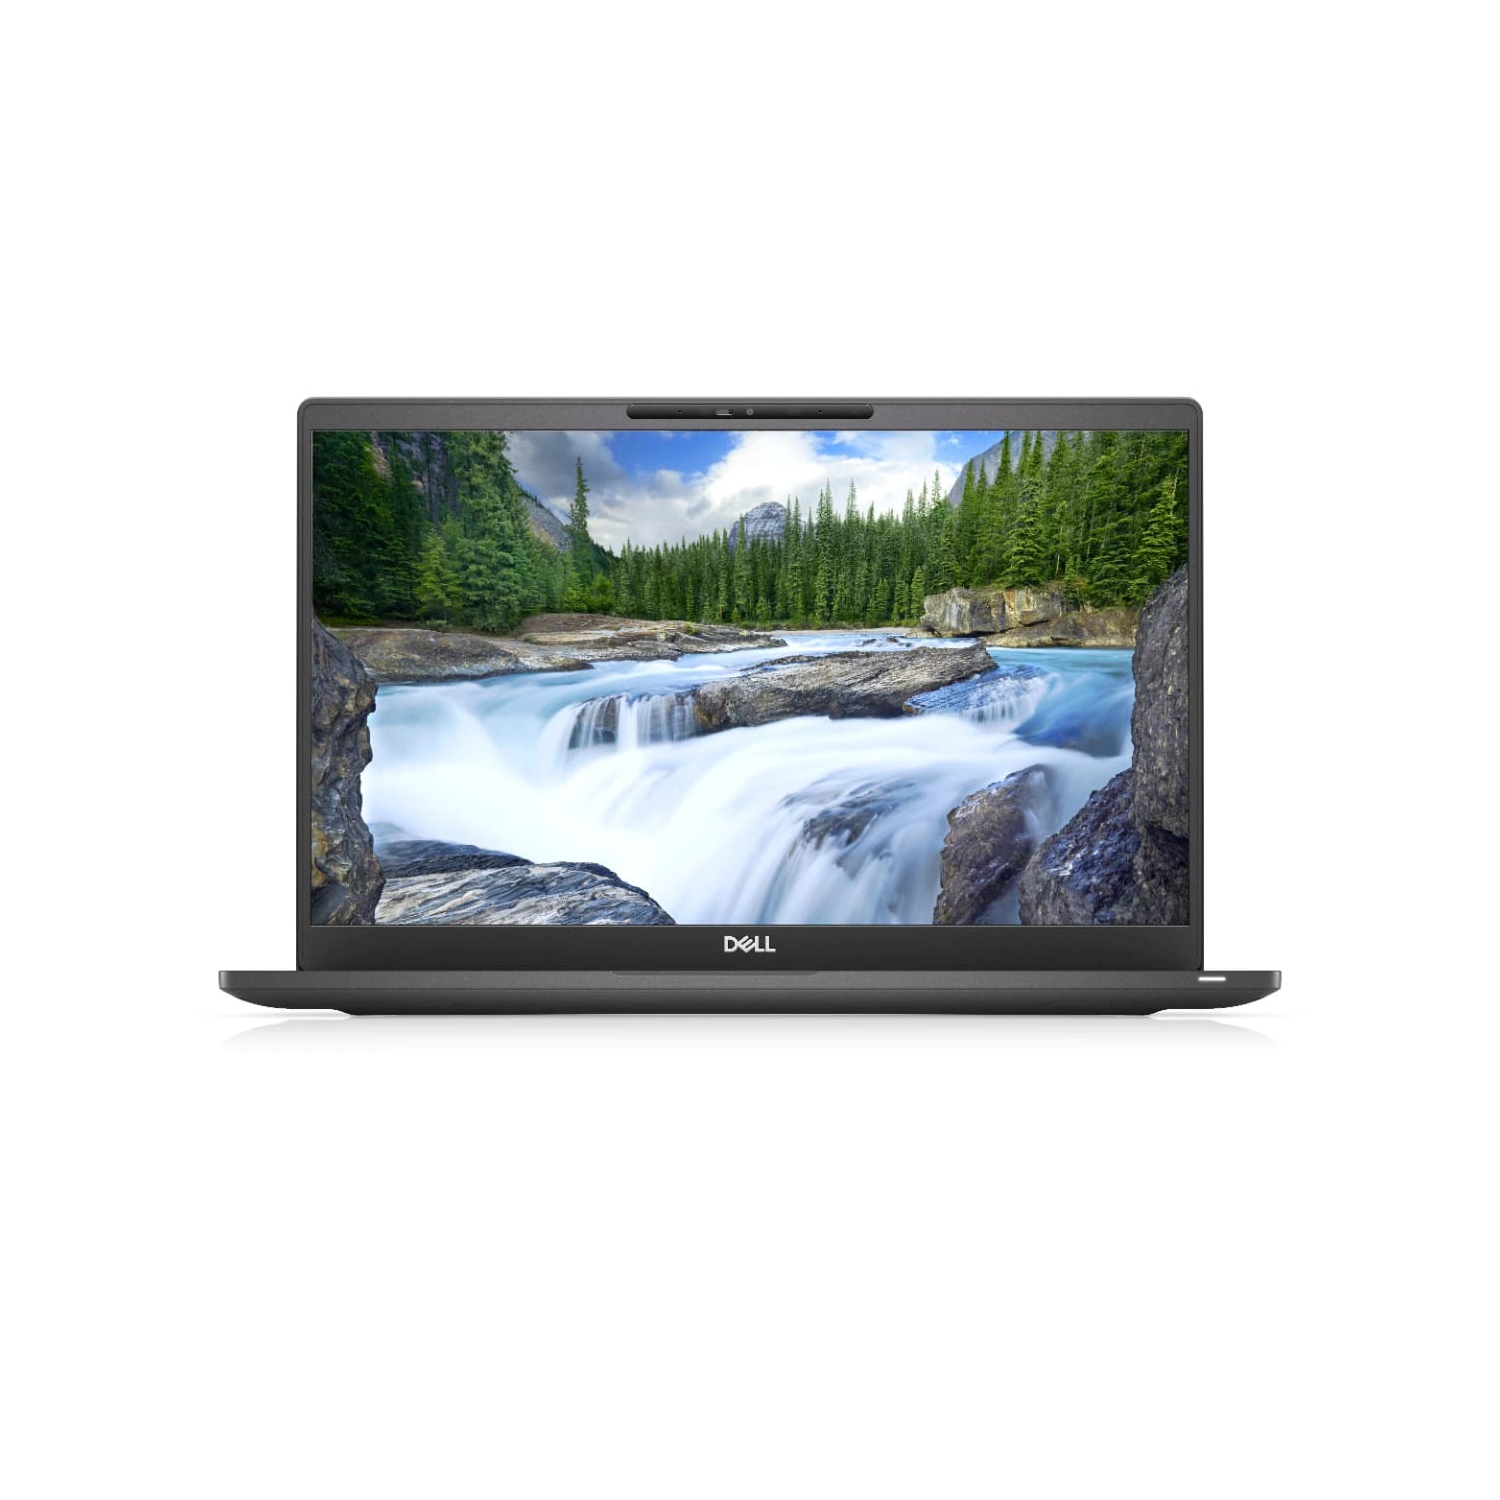 Refurbished (Excellent) - Dell Latitude 7000 7400 Laptop (2019) | 14" FHD | Core i7 - 512GB SSD - 16GB RAM | 4 Cores @ 4.8 GHz Certified Refurbished